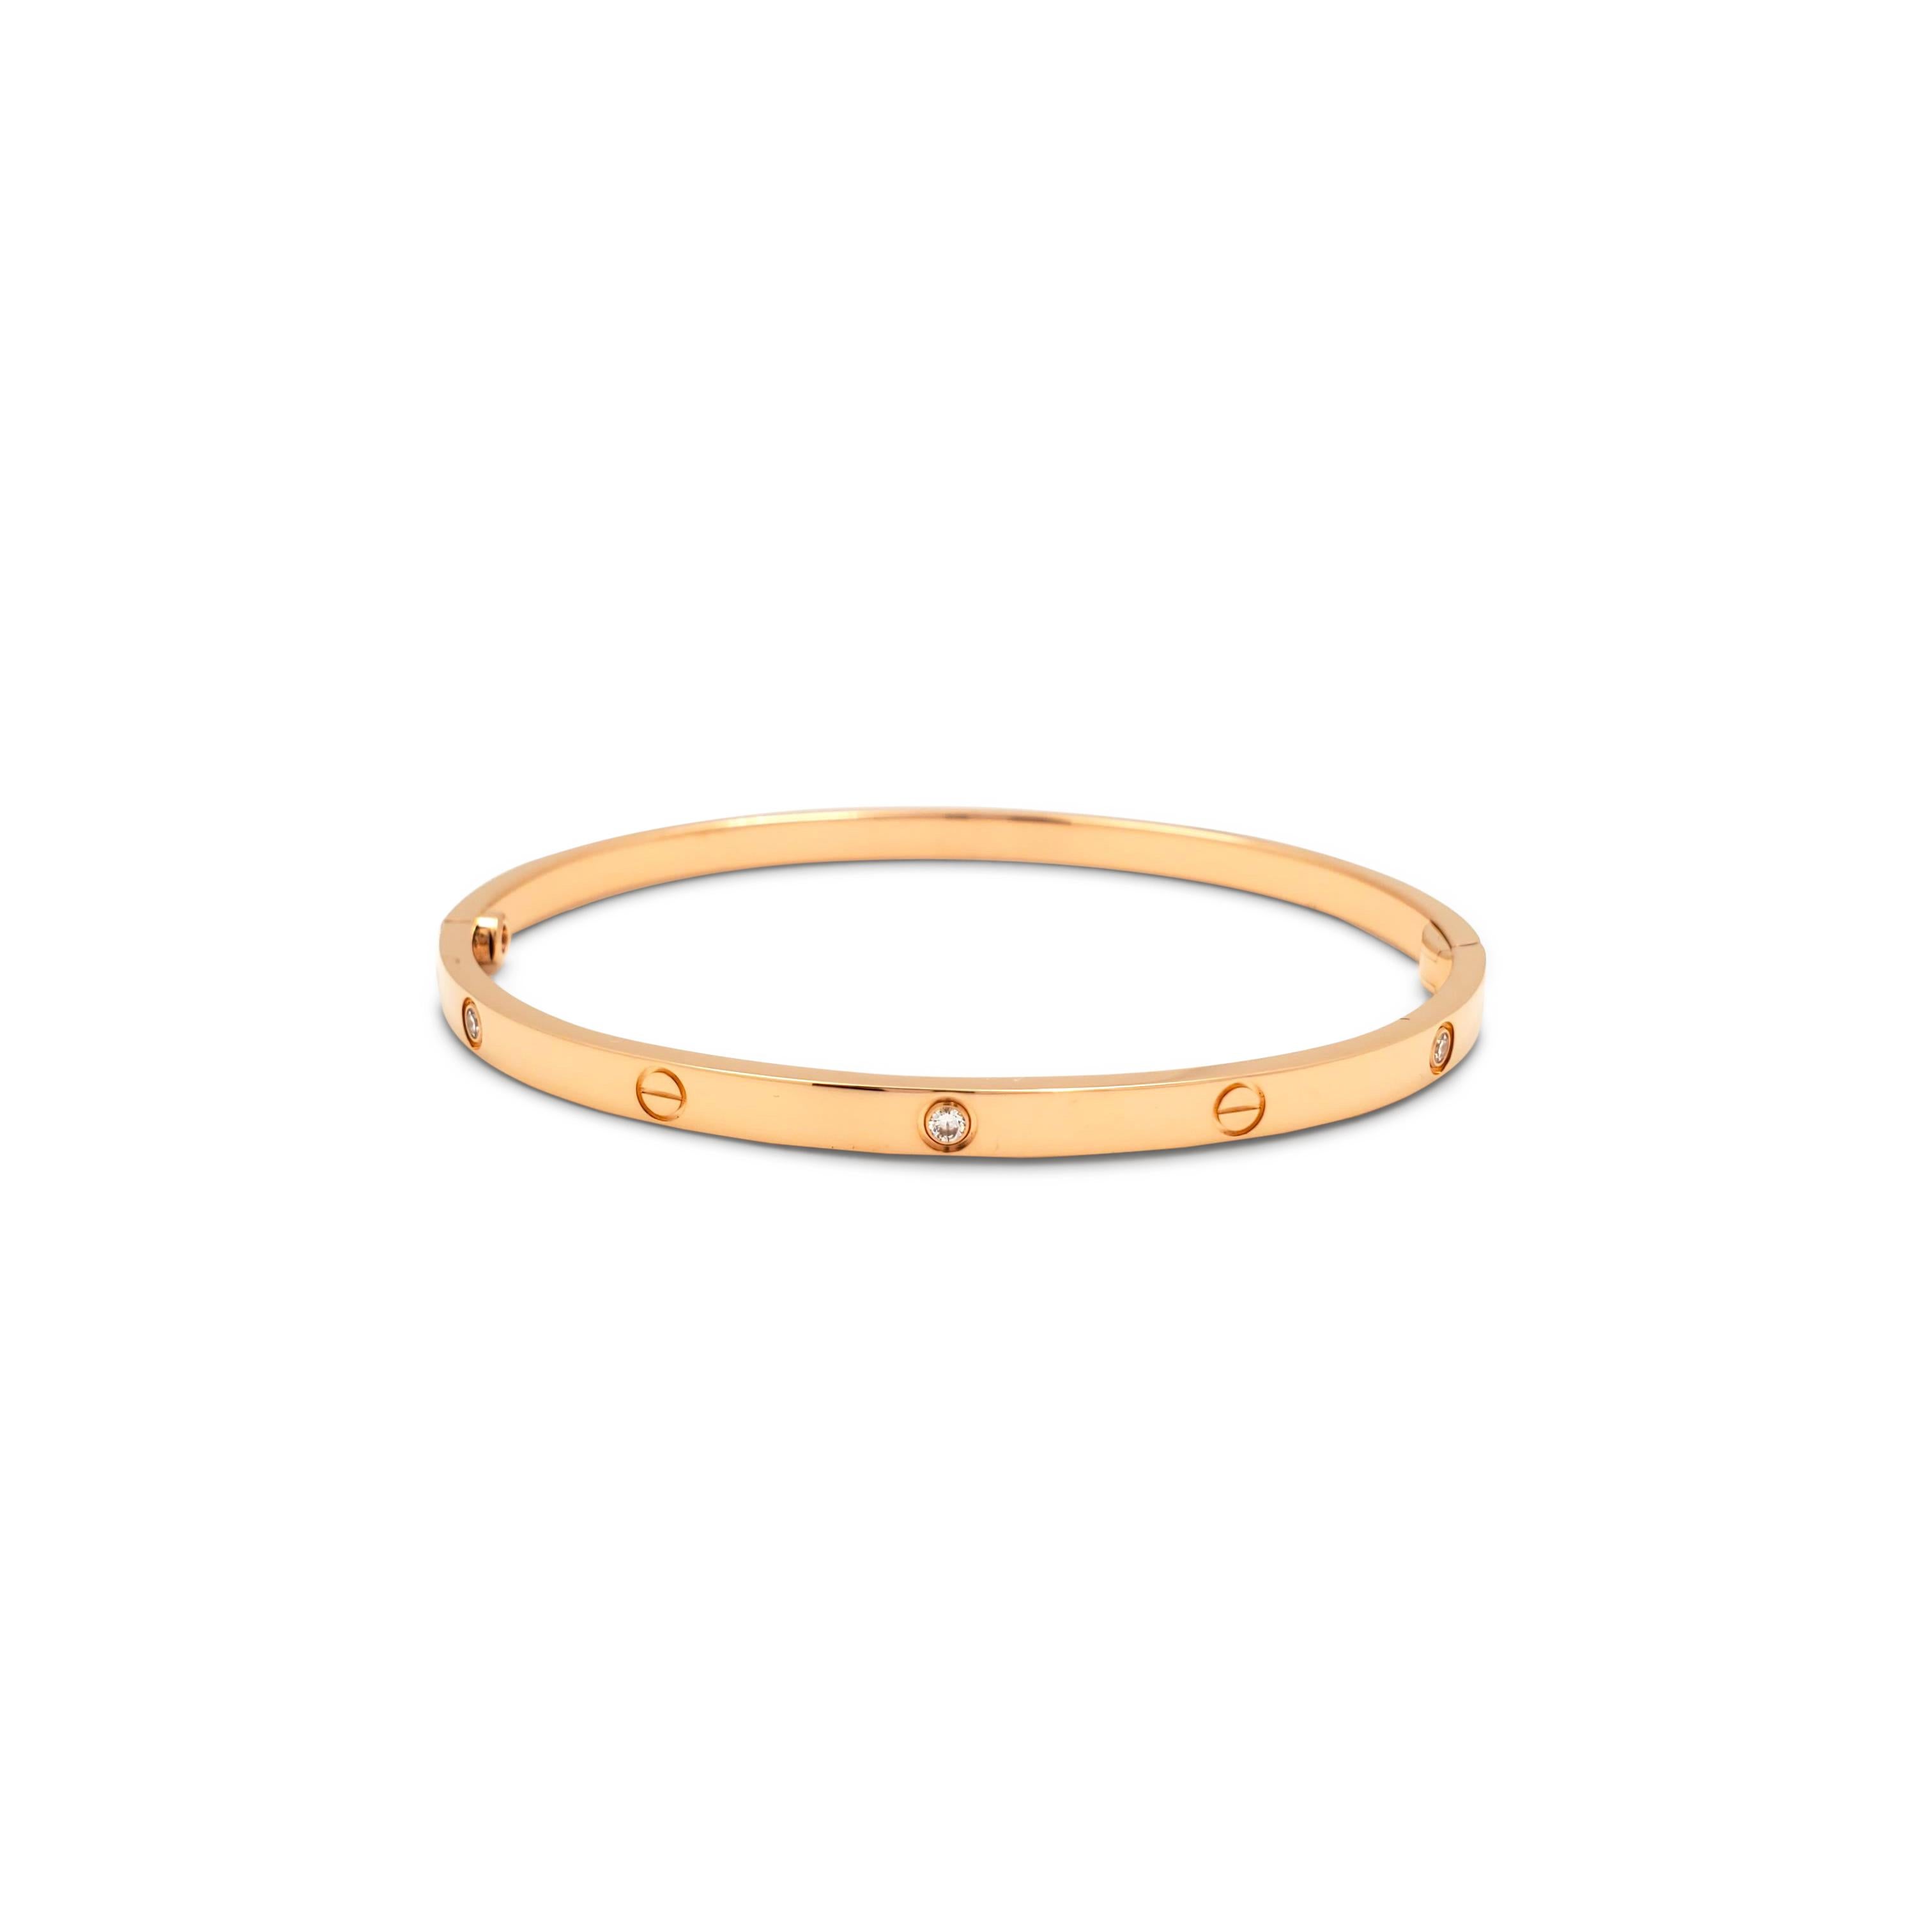 Authentic Cartier 'Love' bracelet crafted in 18 karat rose gold is set with six round brilliant cut diamonds (E-F, VS) weighing approximately 0.15 carats total. Size 17.  Signed Cartier, Au750, 17, with serial number and hallmark. The bracelet is